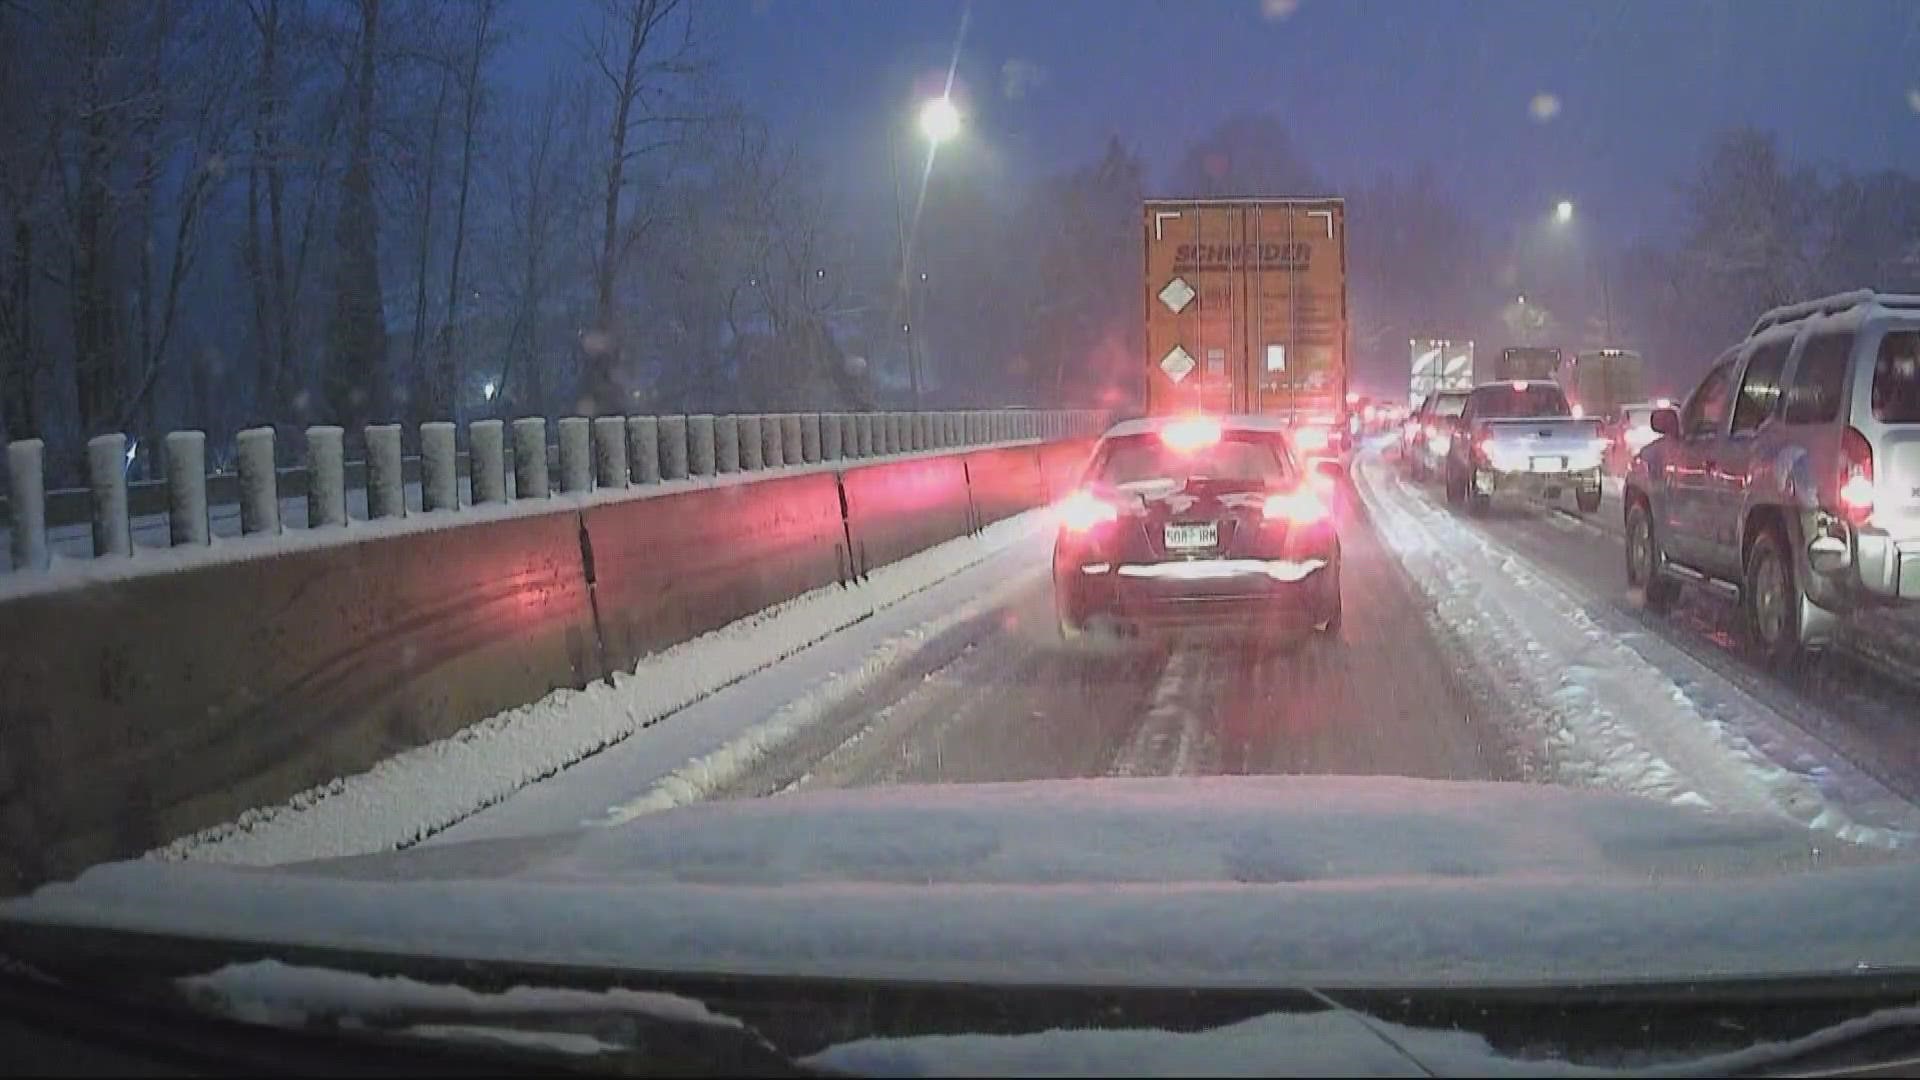 Snow brought traffic in Portland to a standstill during Wednesday's afternoon commute. Many major roadways were slick, slowing down traffic.